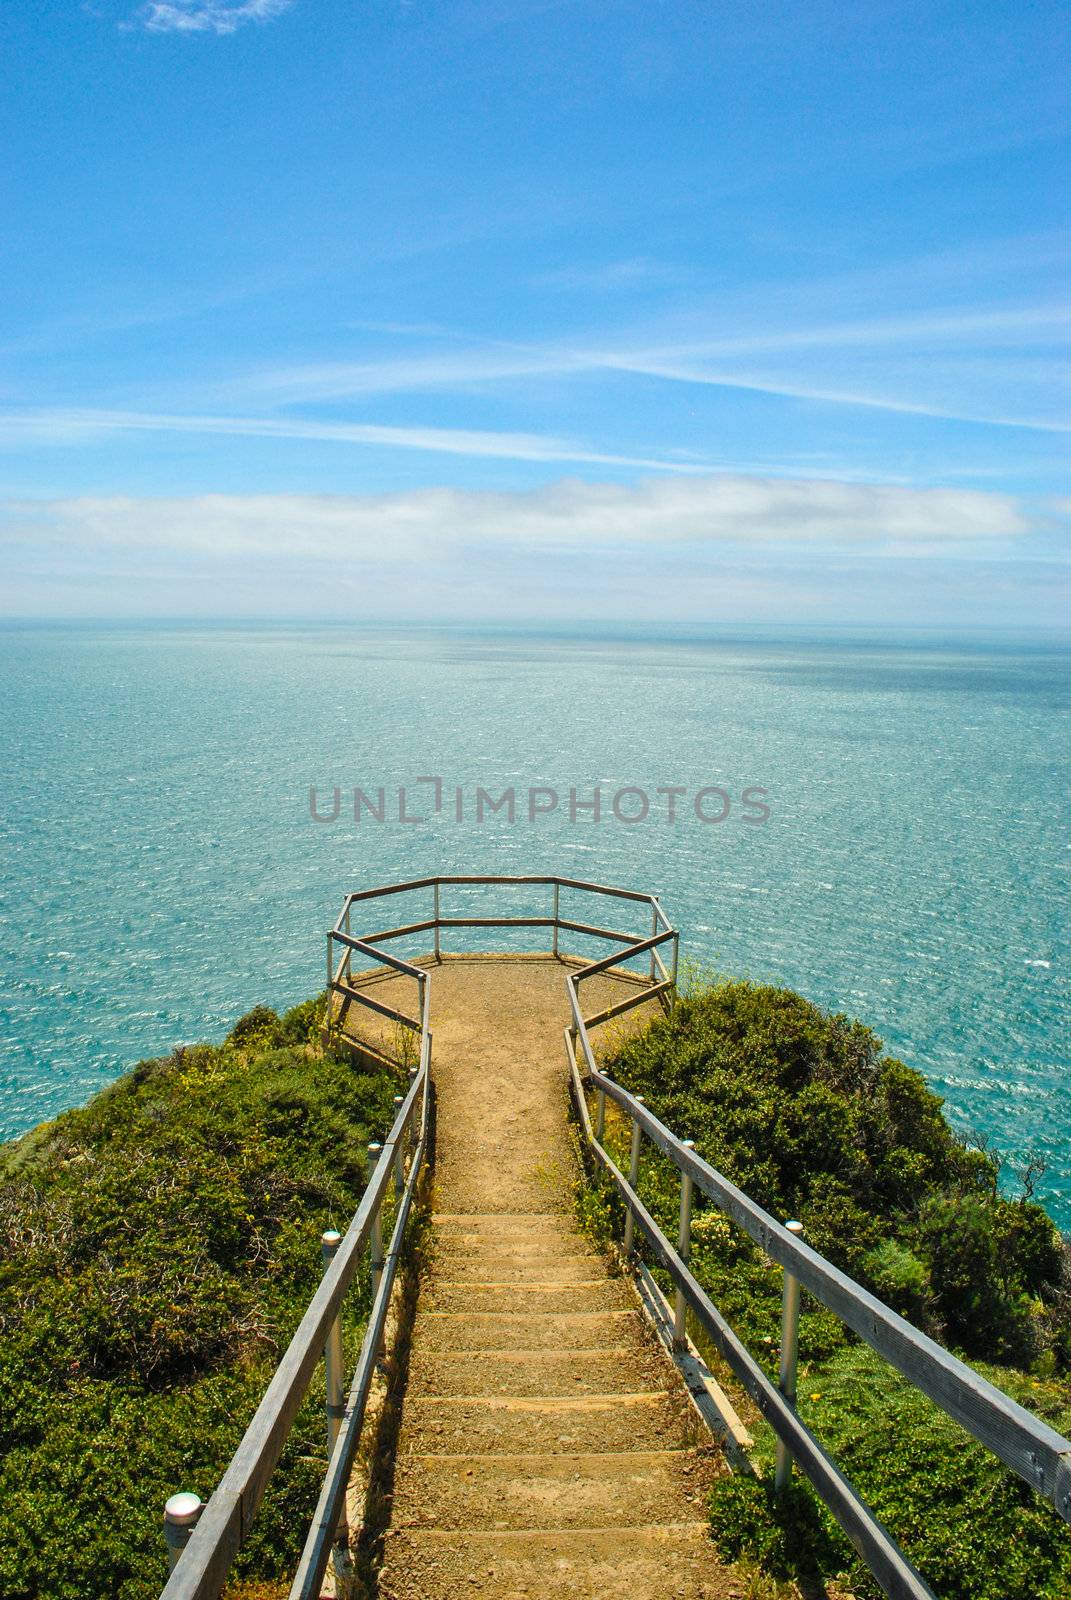 Photograph of a walkway leading to overlook on the California Coast overlooking the Pacific Ocean.